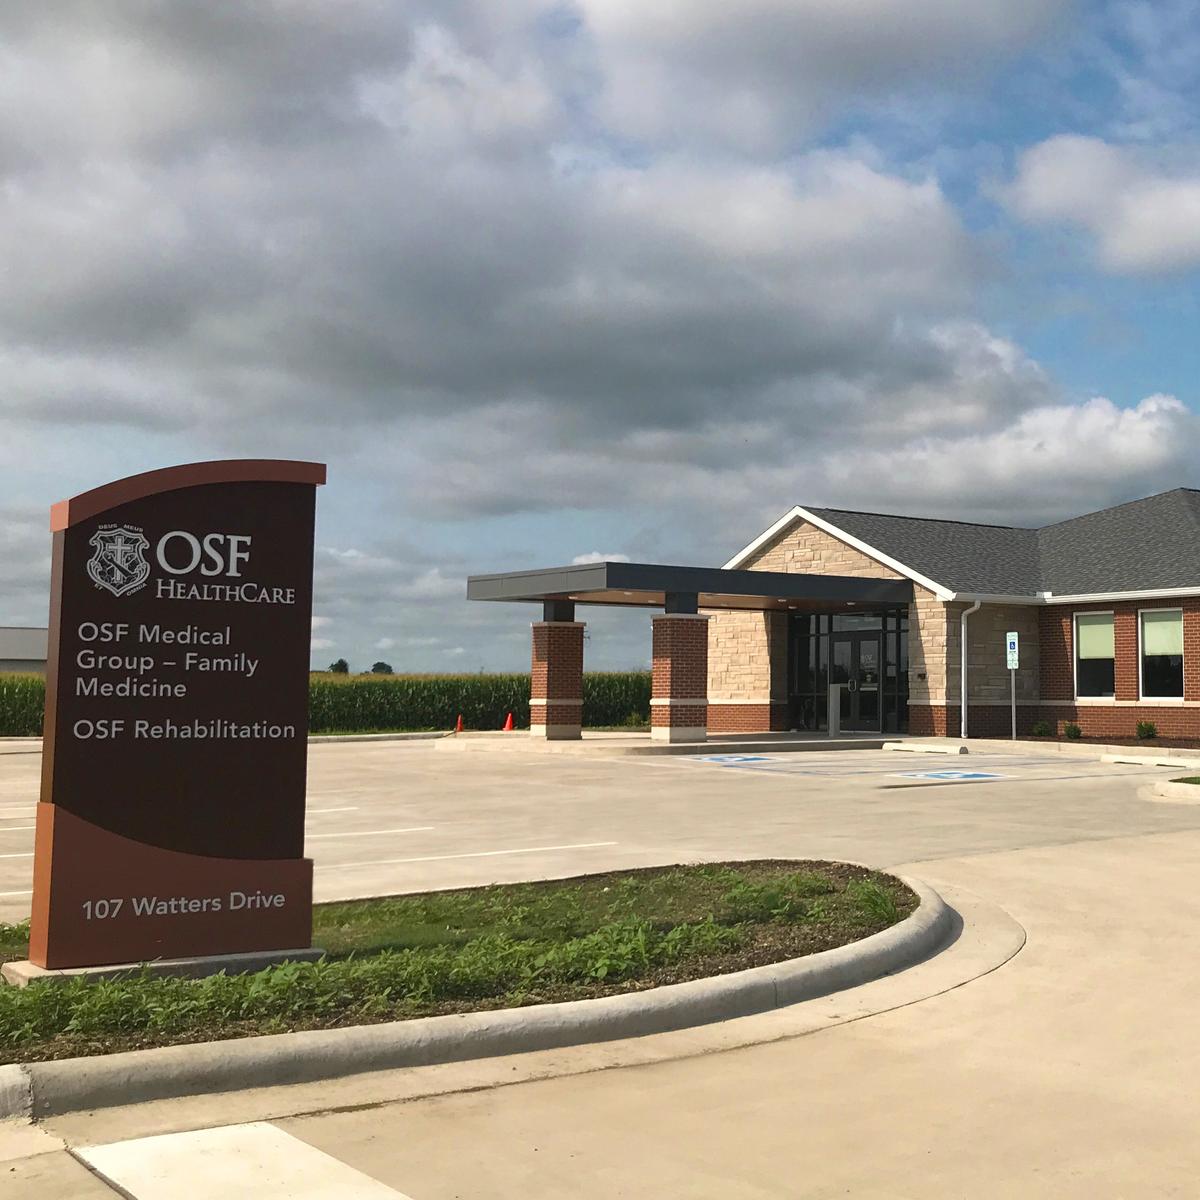 OSF Medical Group - Primary Care, 107 Watters Drive, Dwight, Illinois, 60420